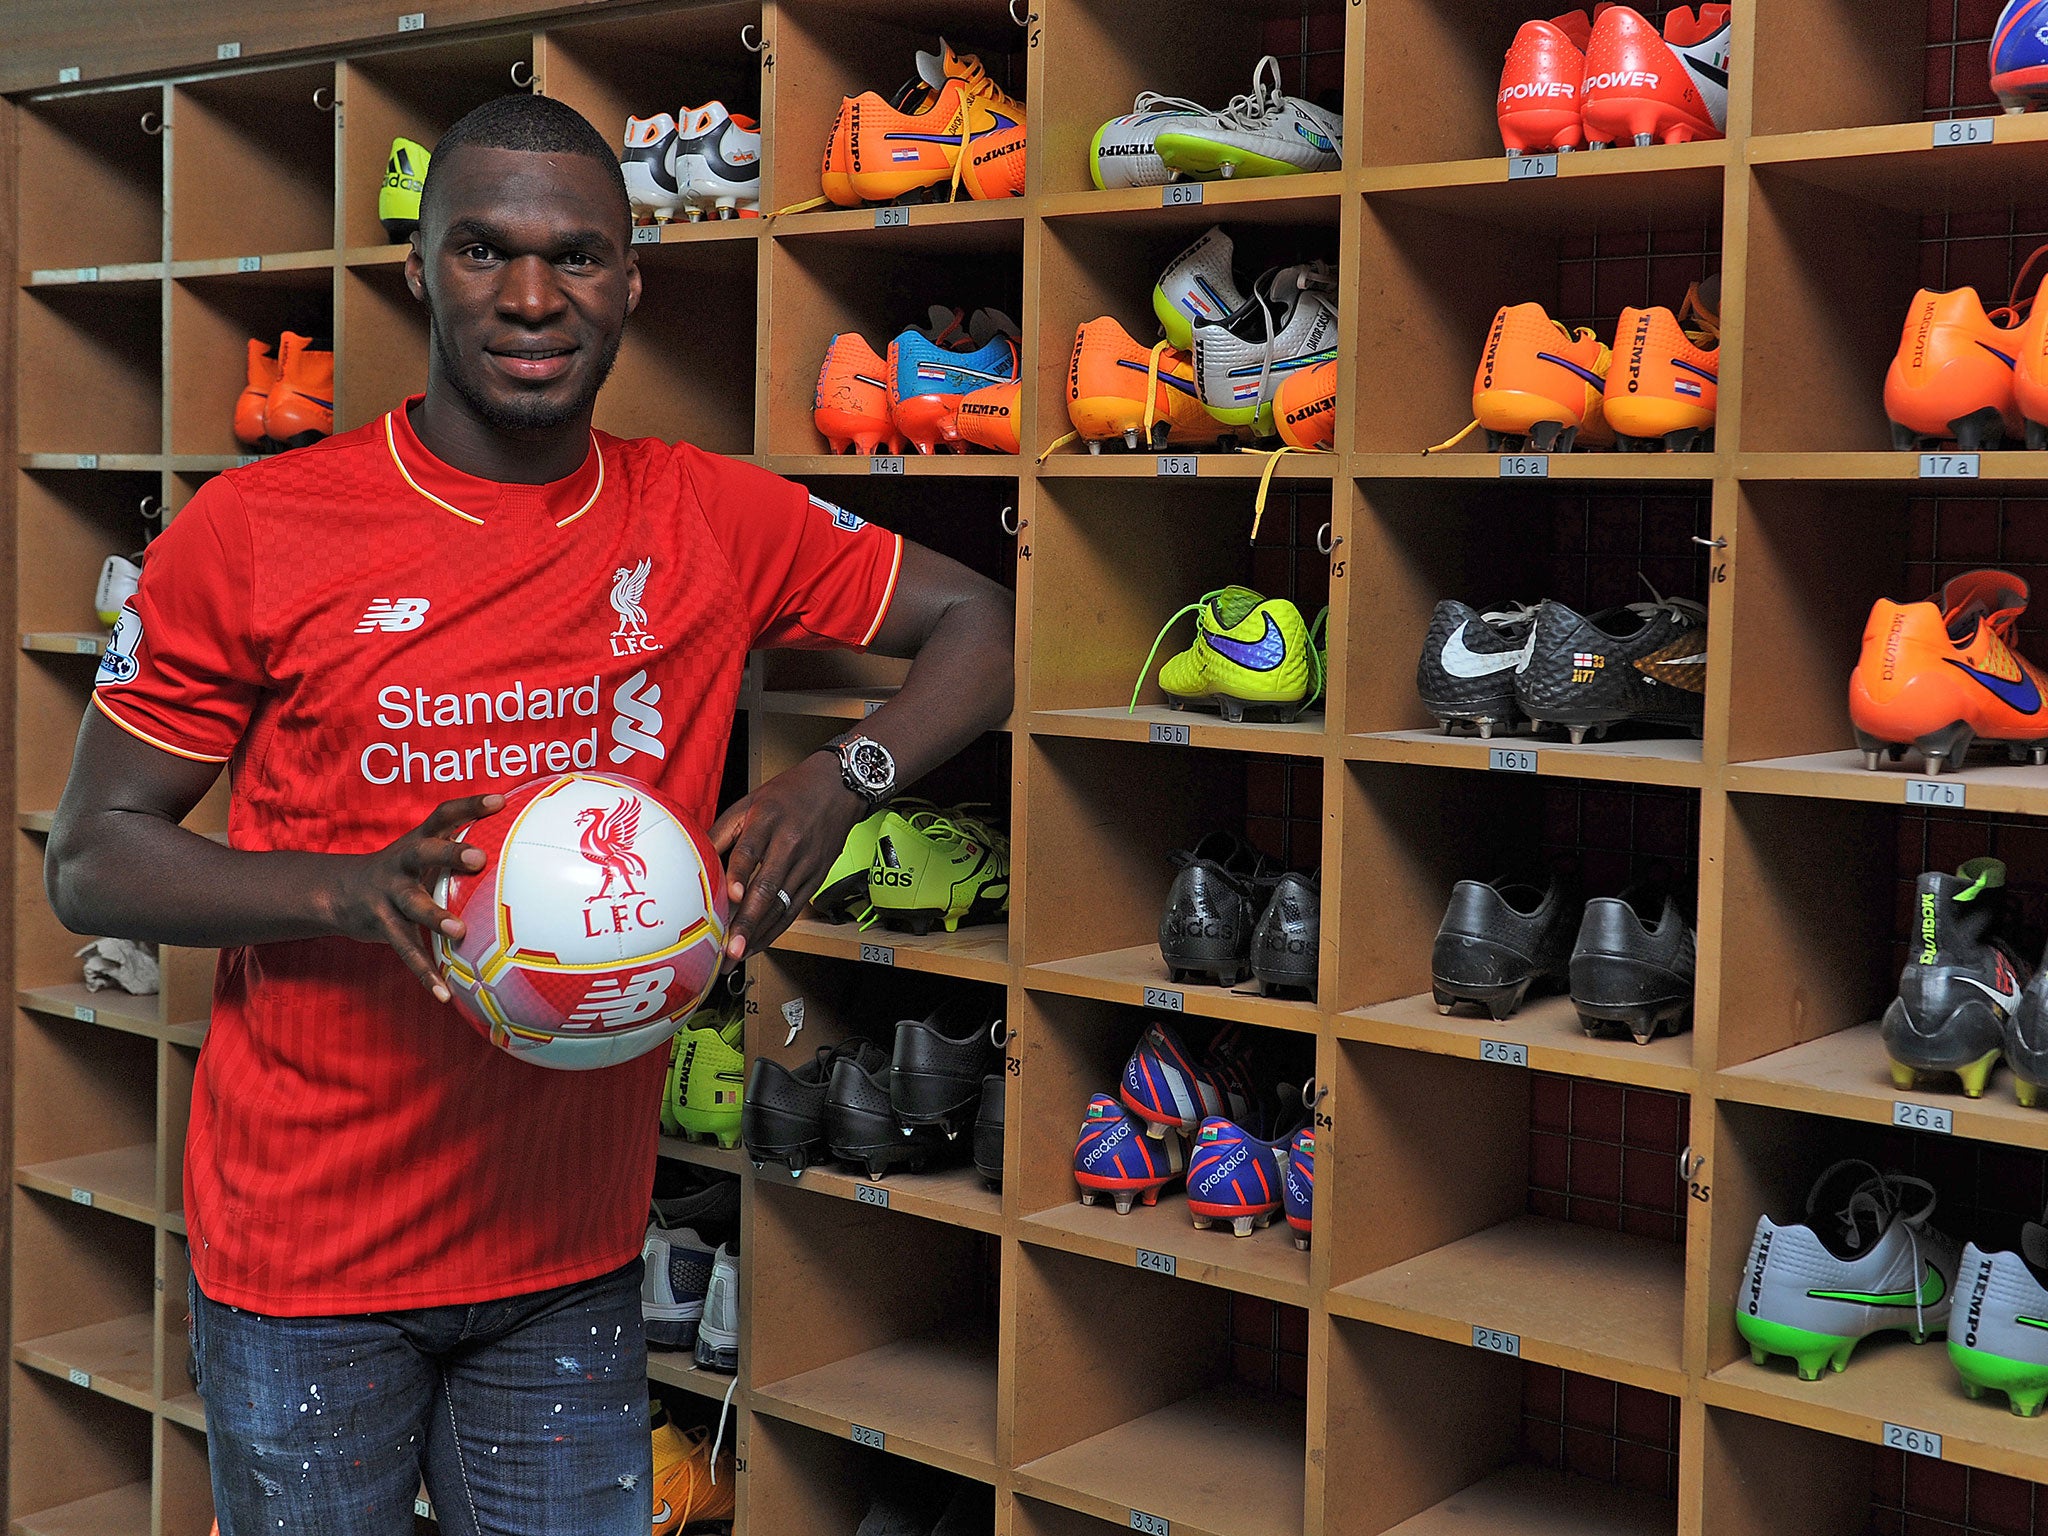 Benteke has joined Liverpool in a £32.5m deal